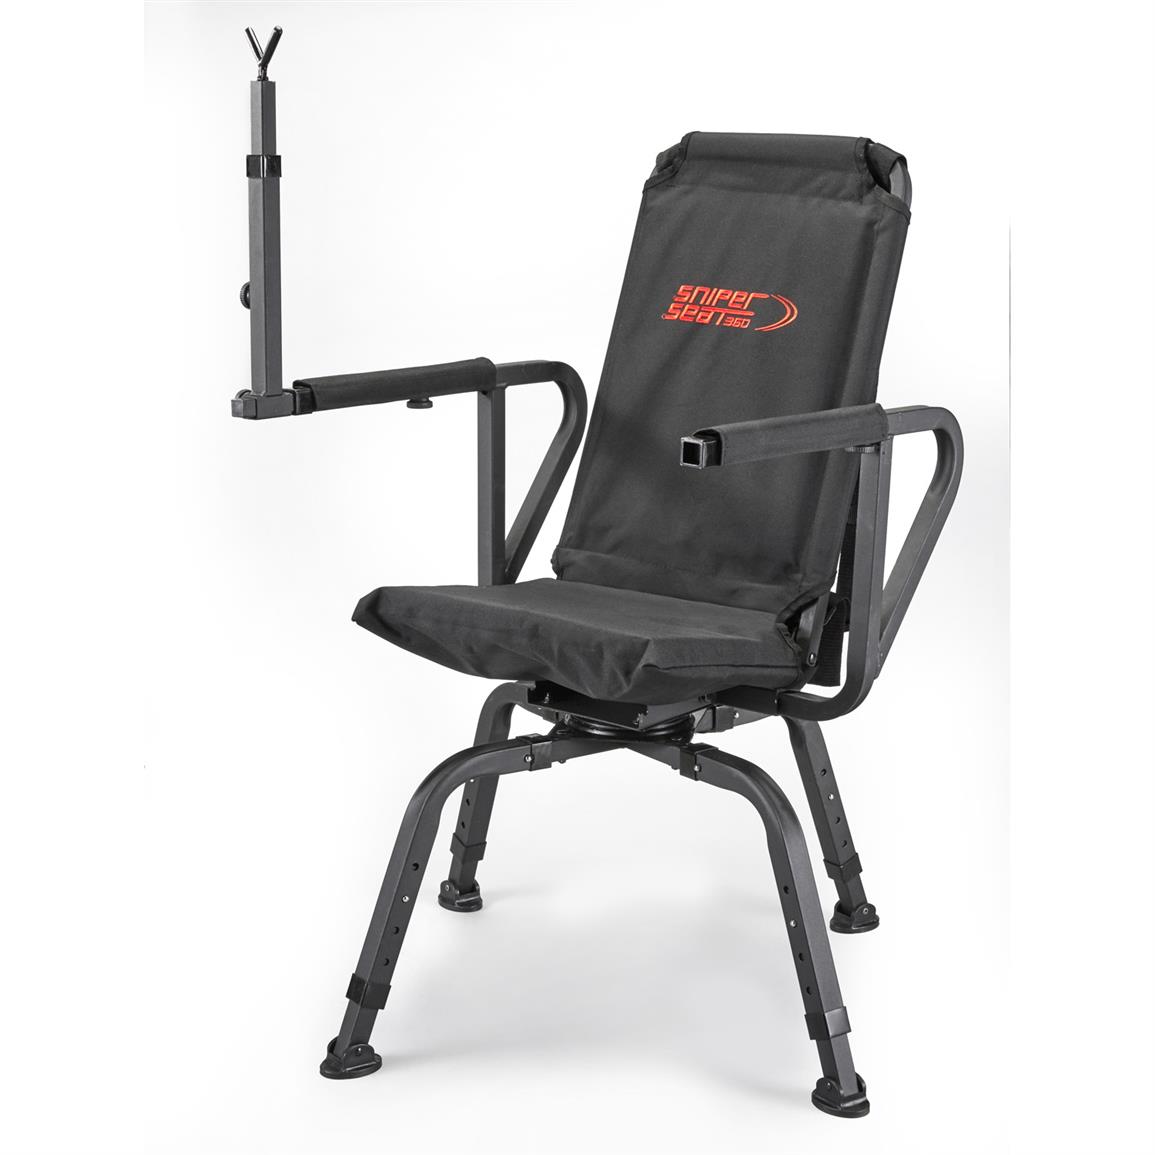 Sniper Seat 360 Shooting Chair 625980 Stools Chairs Seat